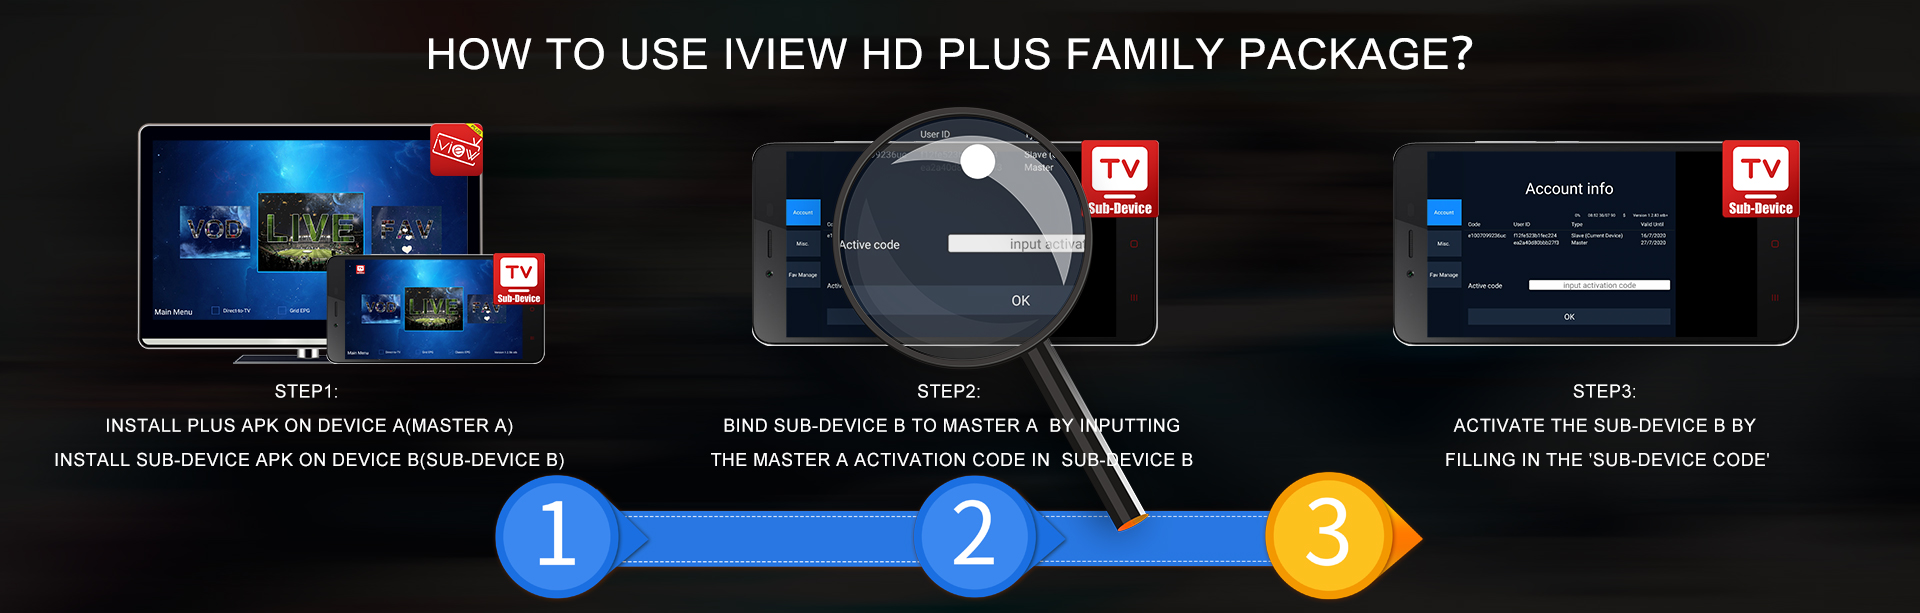 IPTV Famuly Package